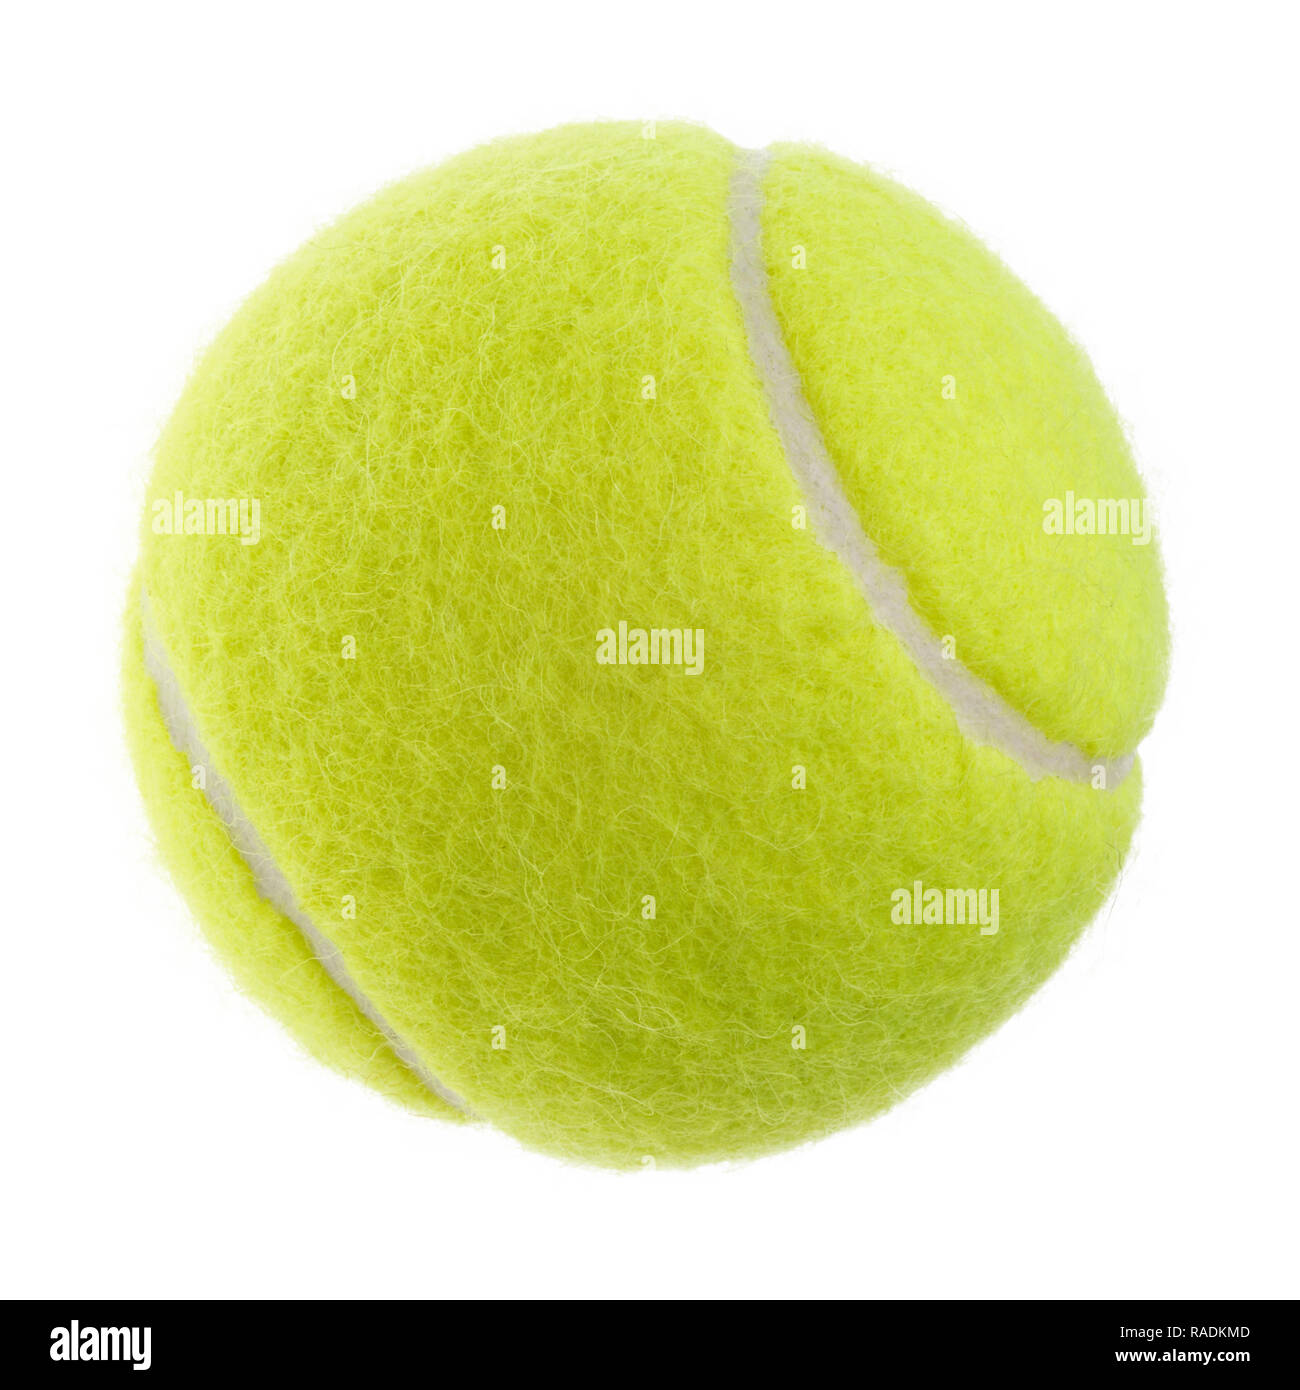 Isolated objects: single yellow green tennis ball on white background Stock Photo